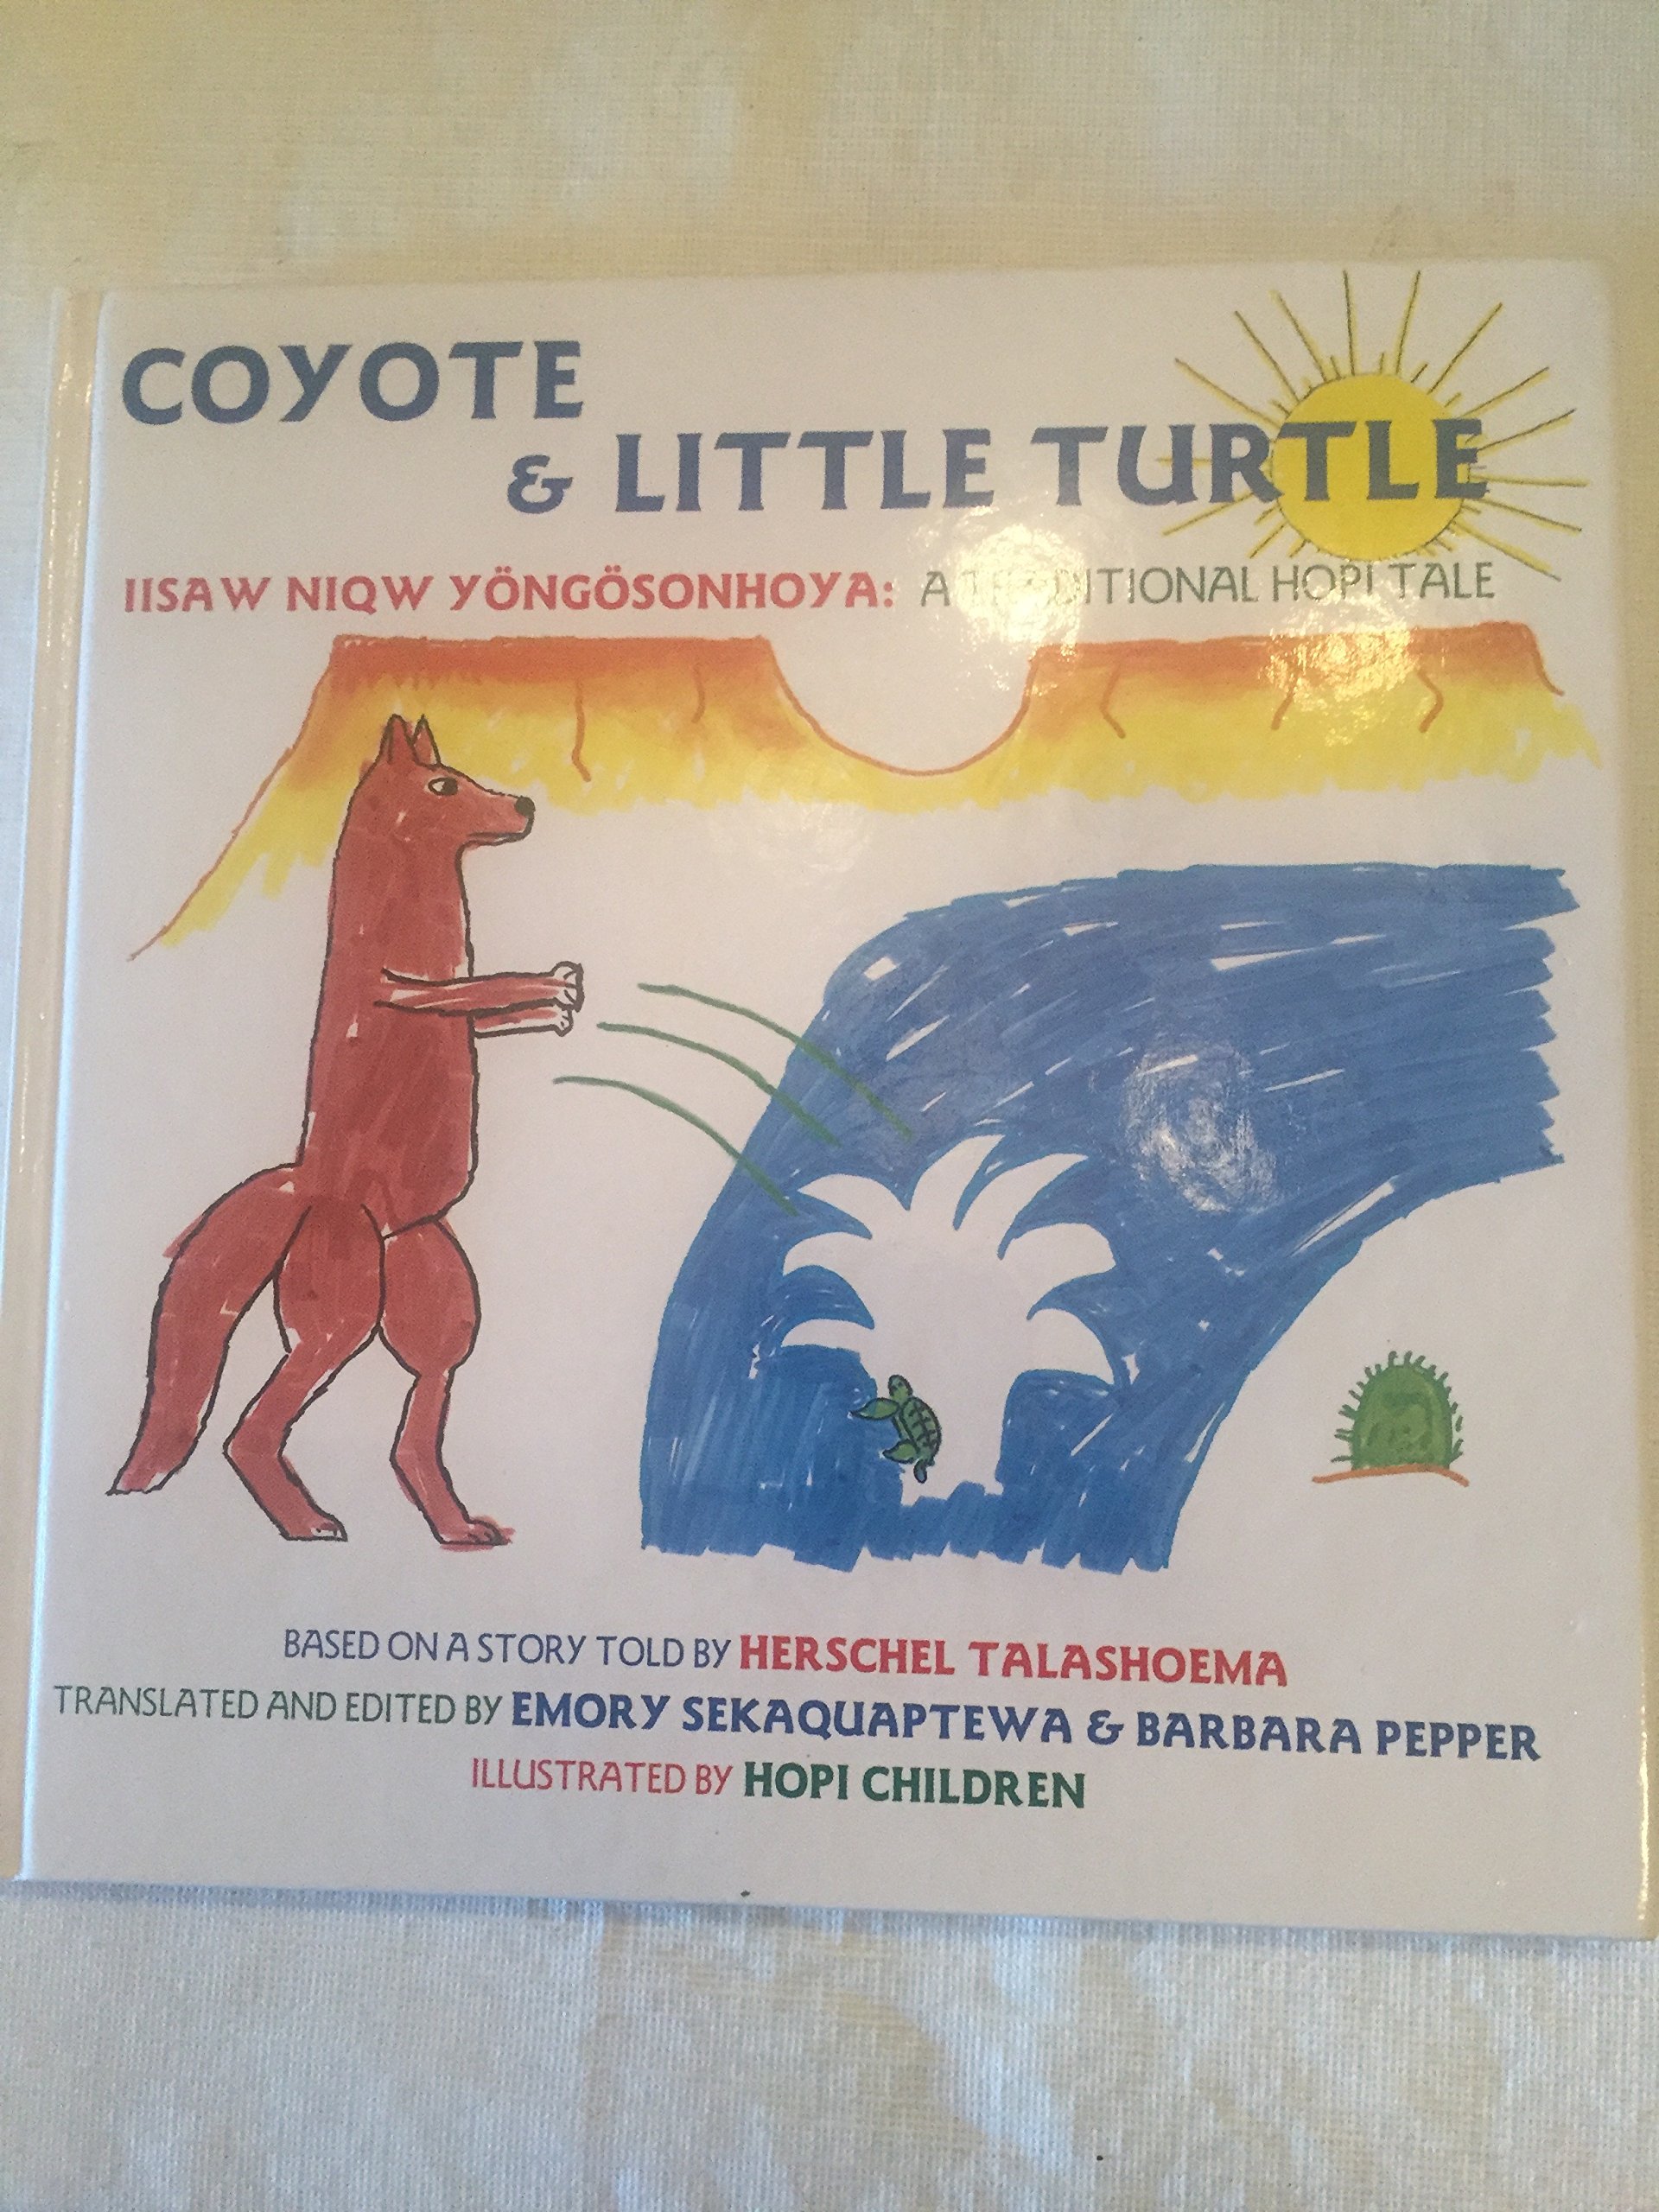 Coyote & Little Turtle magazine reviews